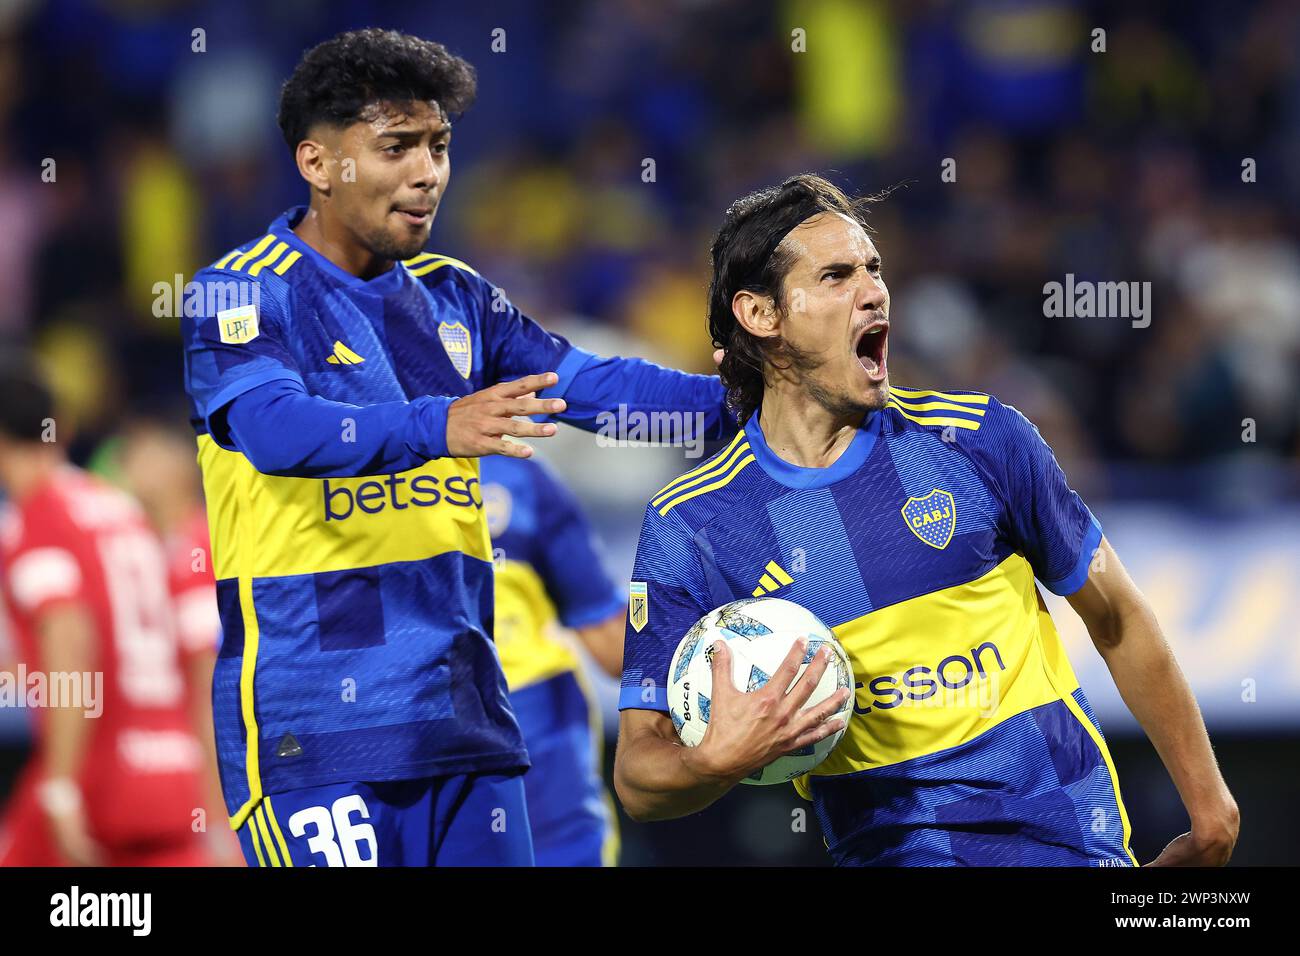 Boca Juniors’ Uruguayan Edinson Cavani (R) celebrates next teammate midfielder Cristian Medina after scoring the team’s first goal by penalty kick against Belgrano during the Argentine Professional Football League Cup 2024 match at La Bombonera stadium in Buenos Aires on March 3, 2024.    Boca Juniors won by 3-2 and Cavani scored a hat-trick. (Photo by Alejandro Pagni / PHOTOxPHOTO) Stock Photo